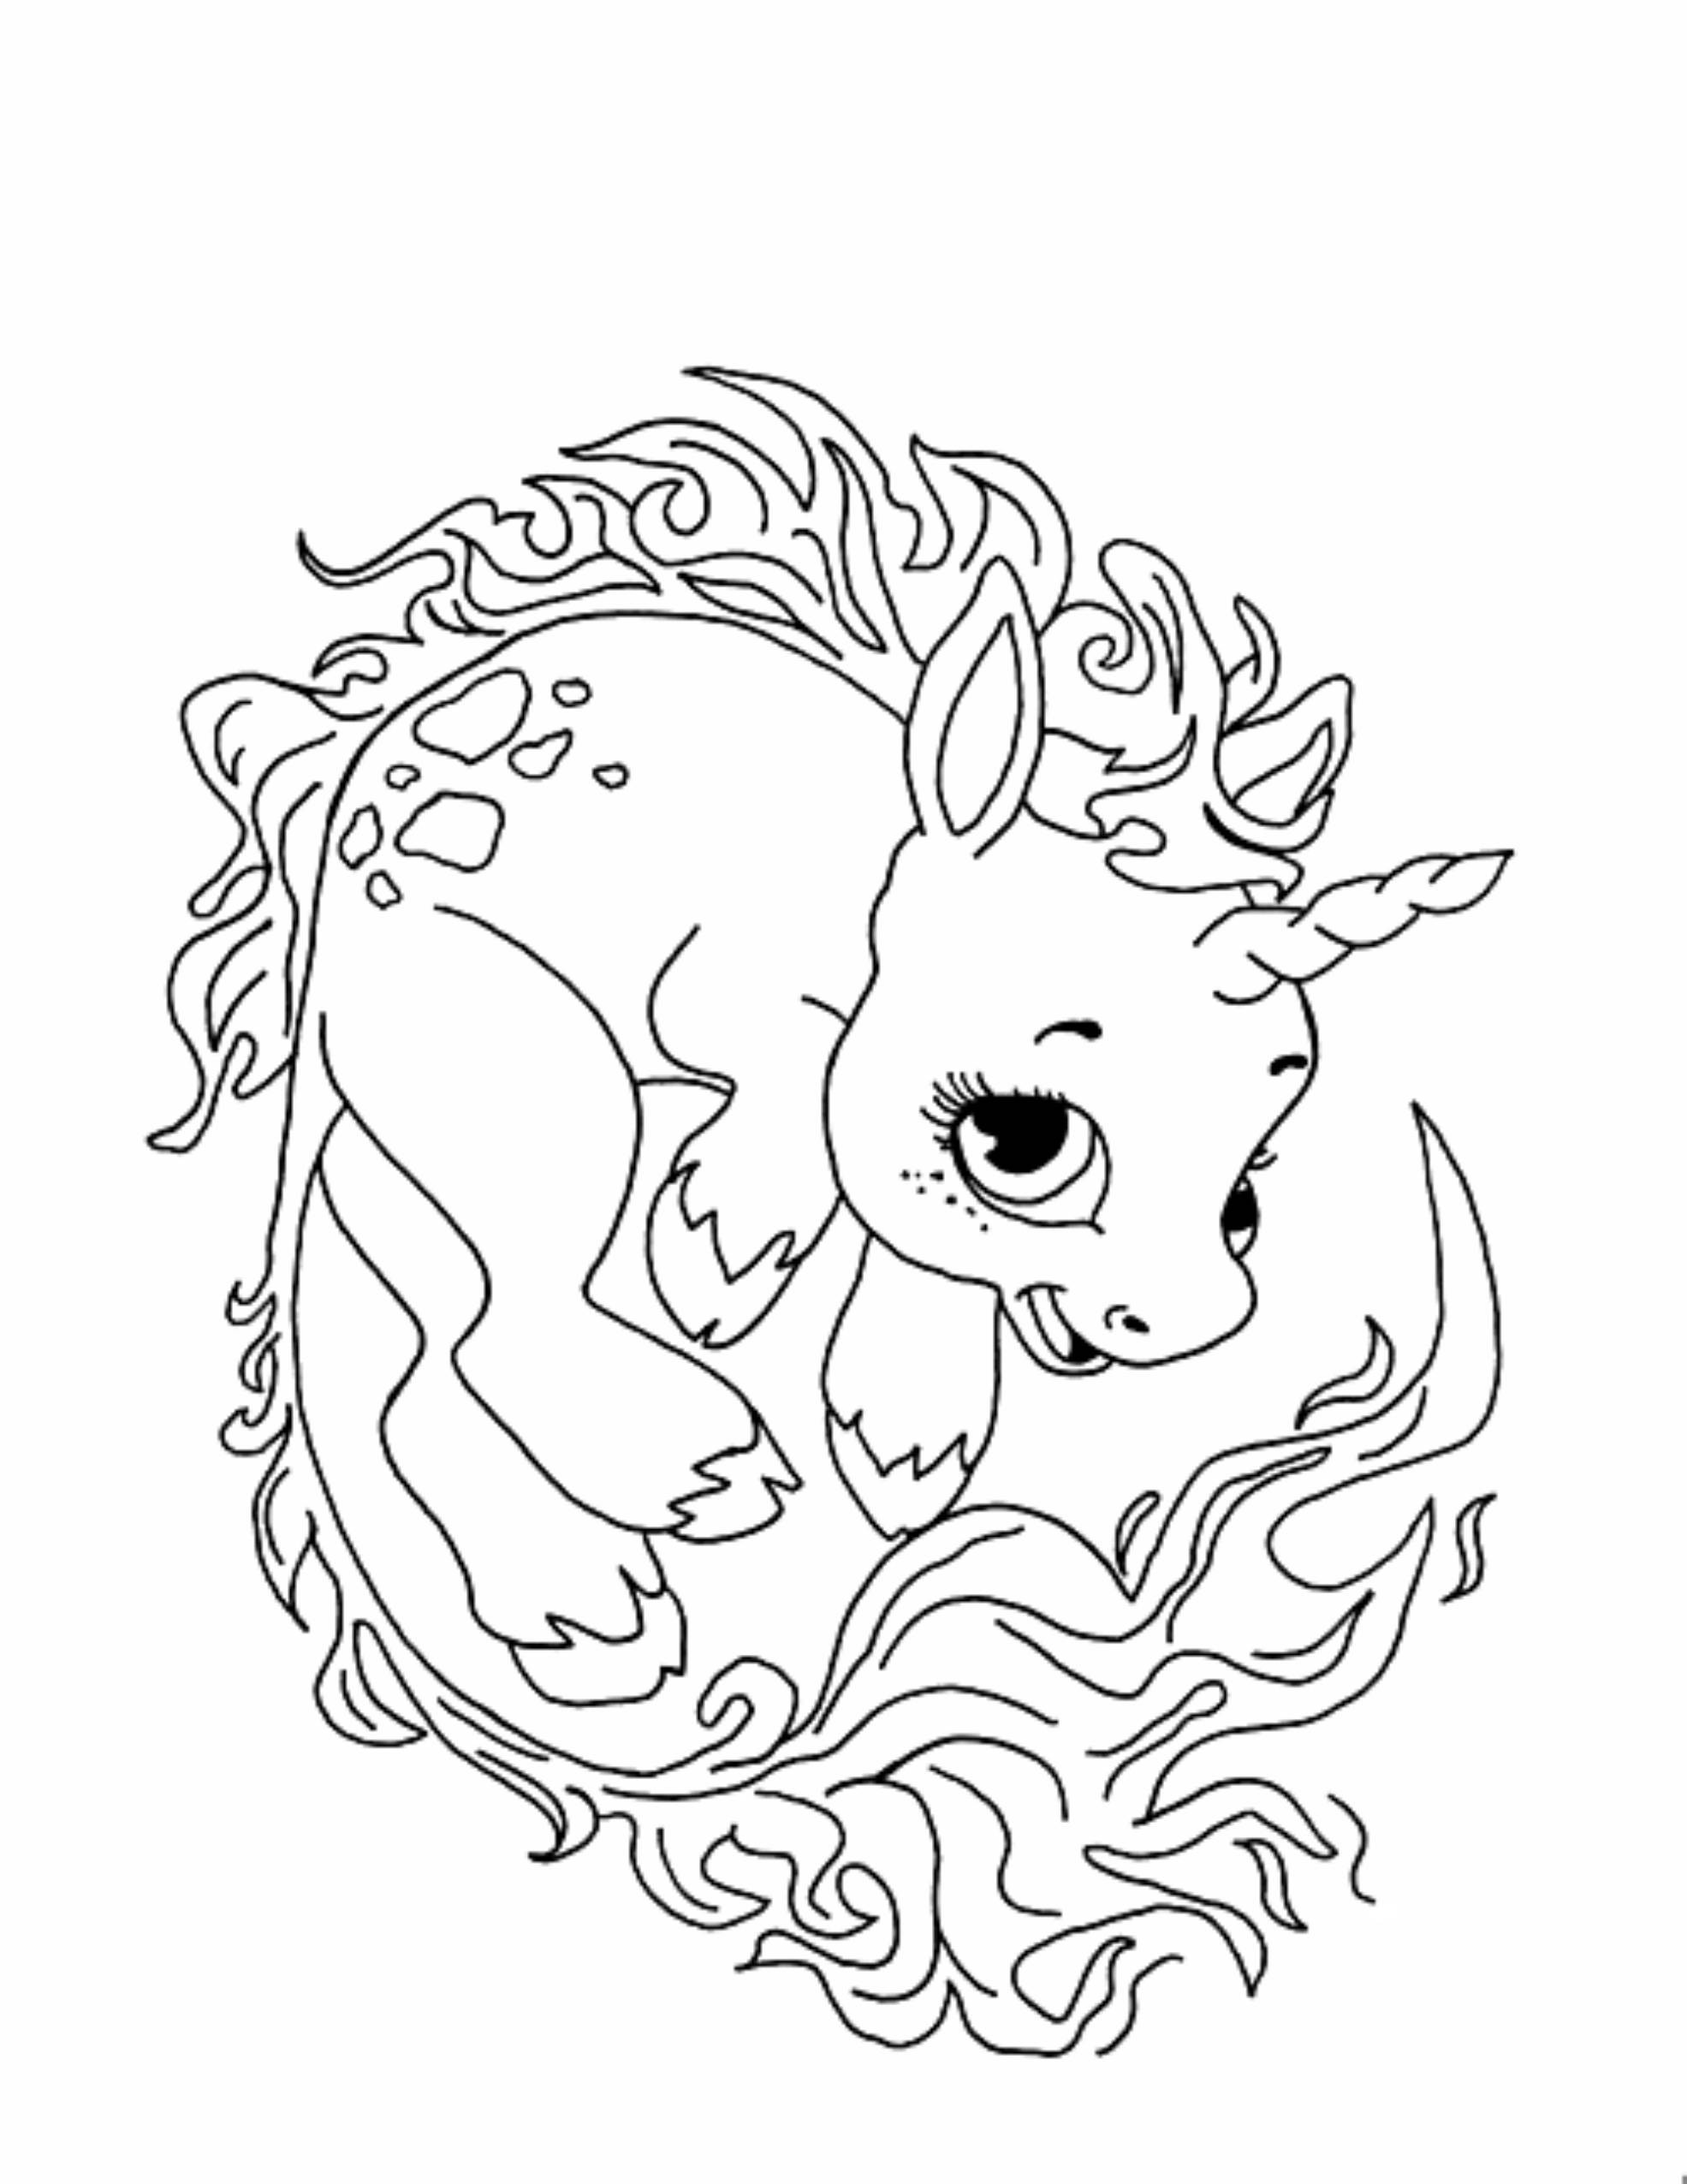 Free Unicorn Coloring Pages
 Print & Download Unicorn Coloring Pages for Children